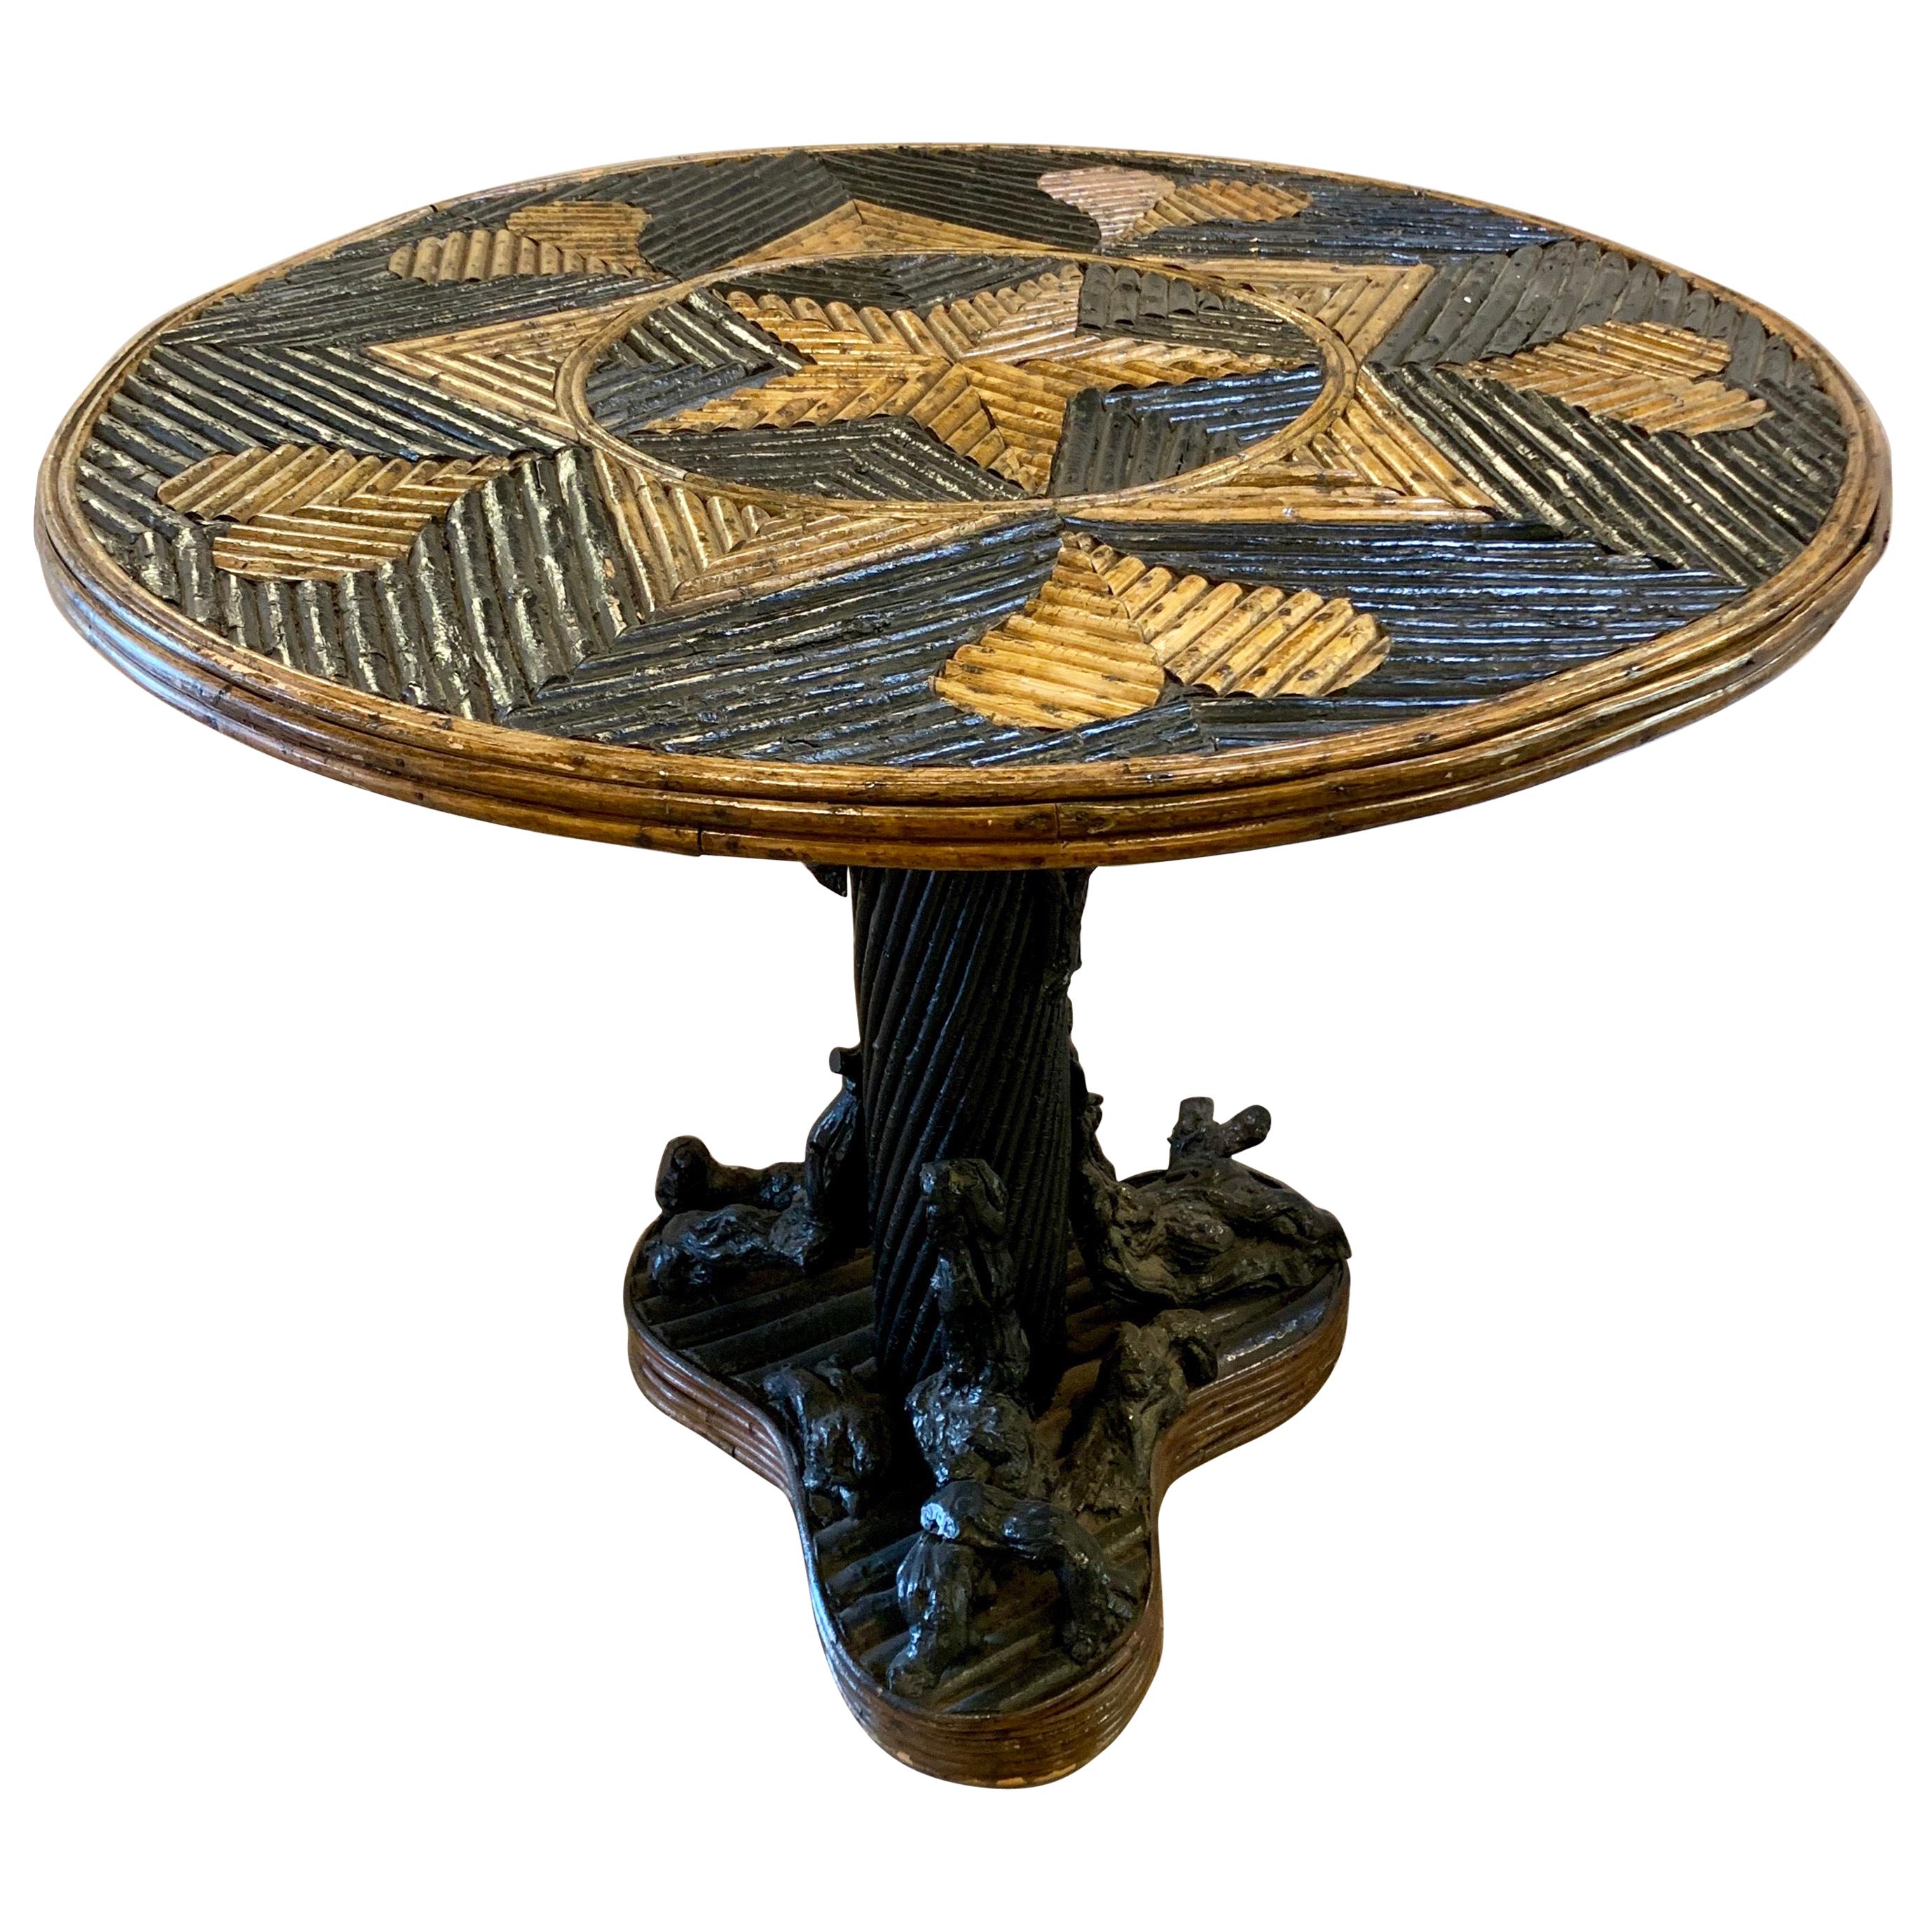 Round Bent Willow Twig Table with Star and Hearts Inlay Adirondack Style